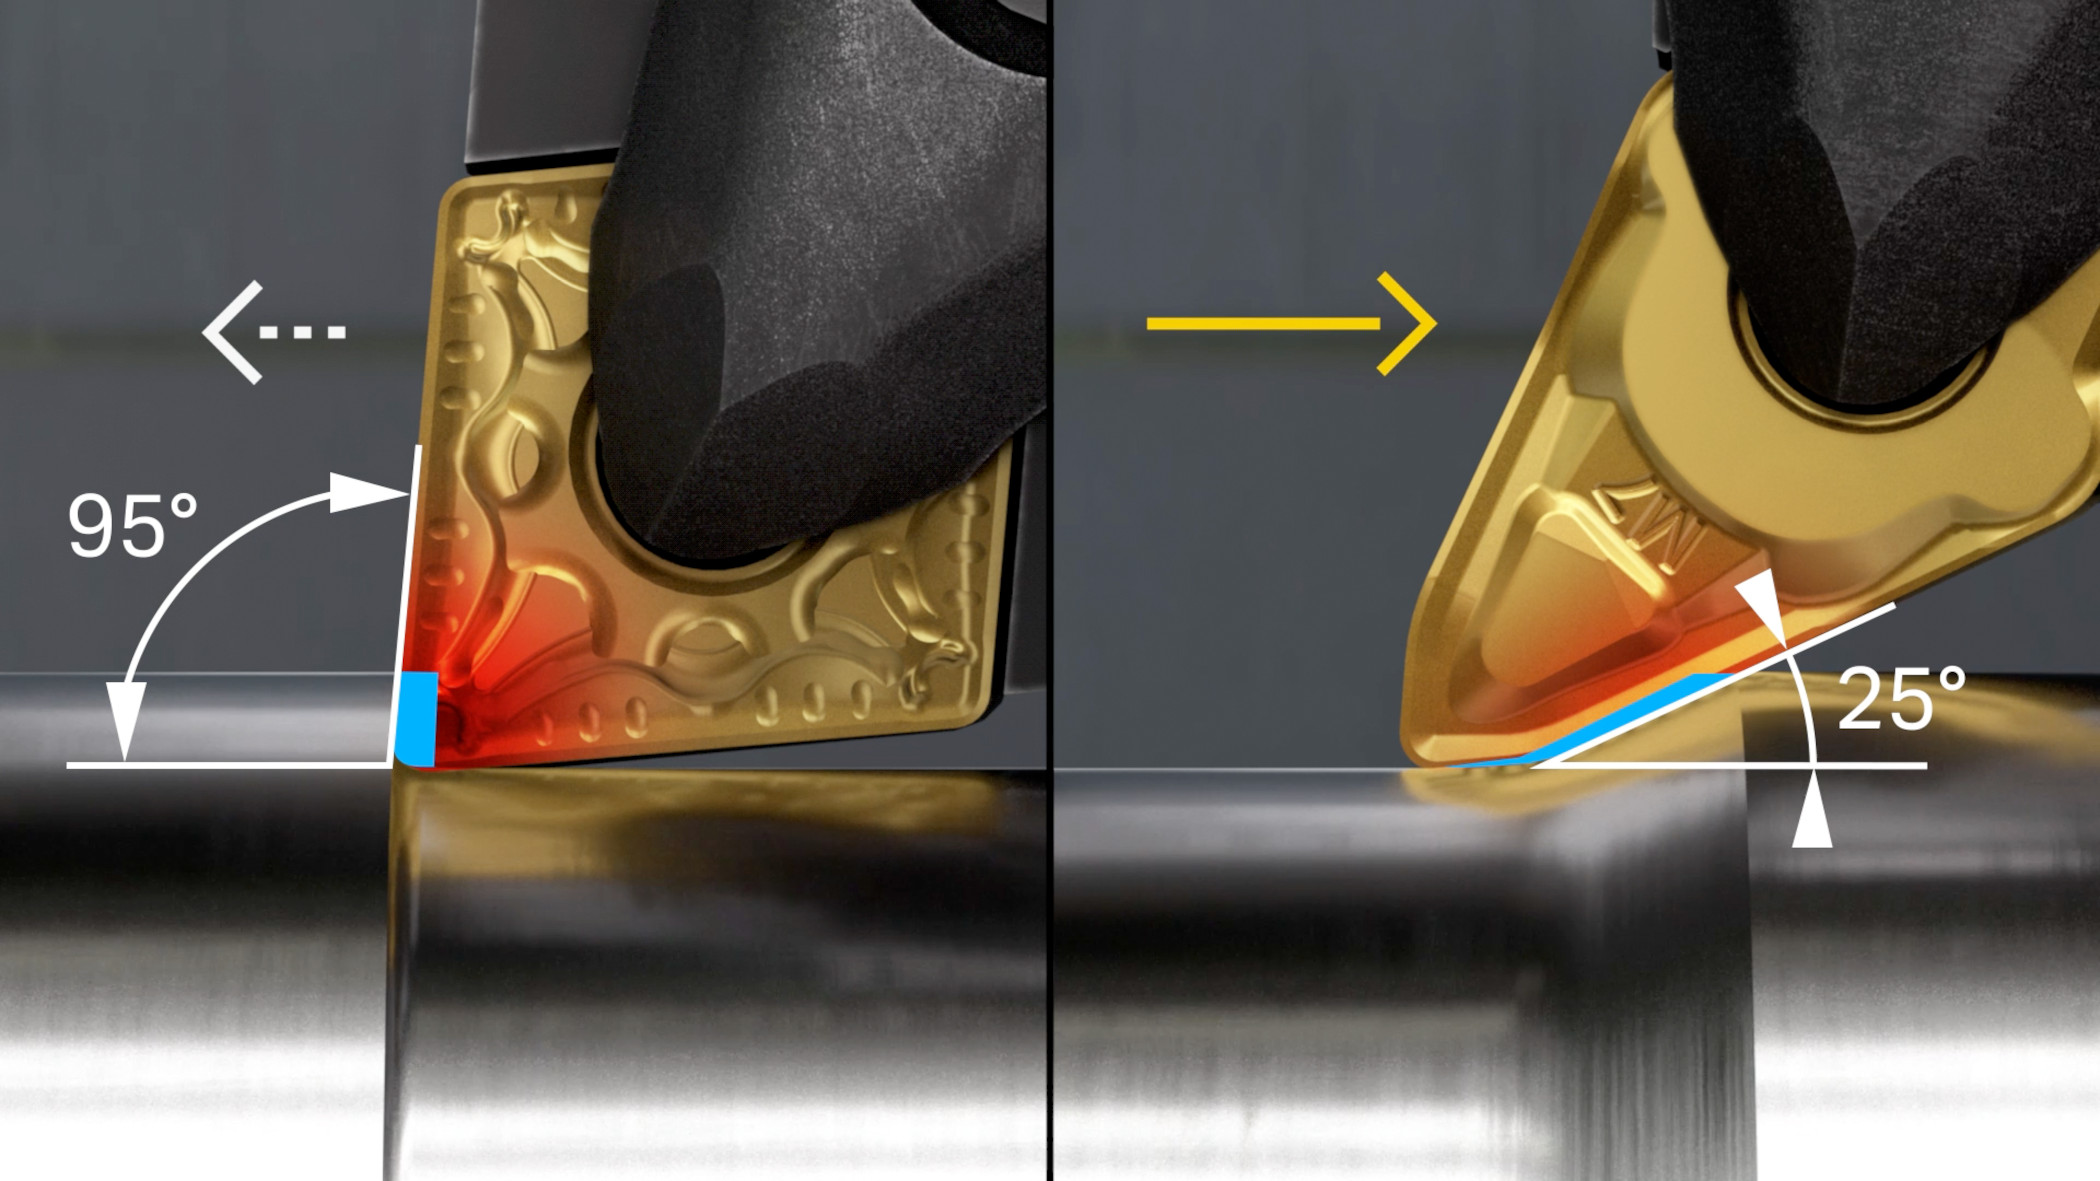 Sandvik Coromant has created its PrimeTurning™ methodology, which includes machining with a small entry angle for higher productivity and longer tool-life.